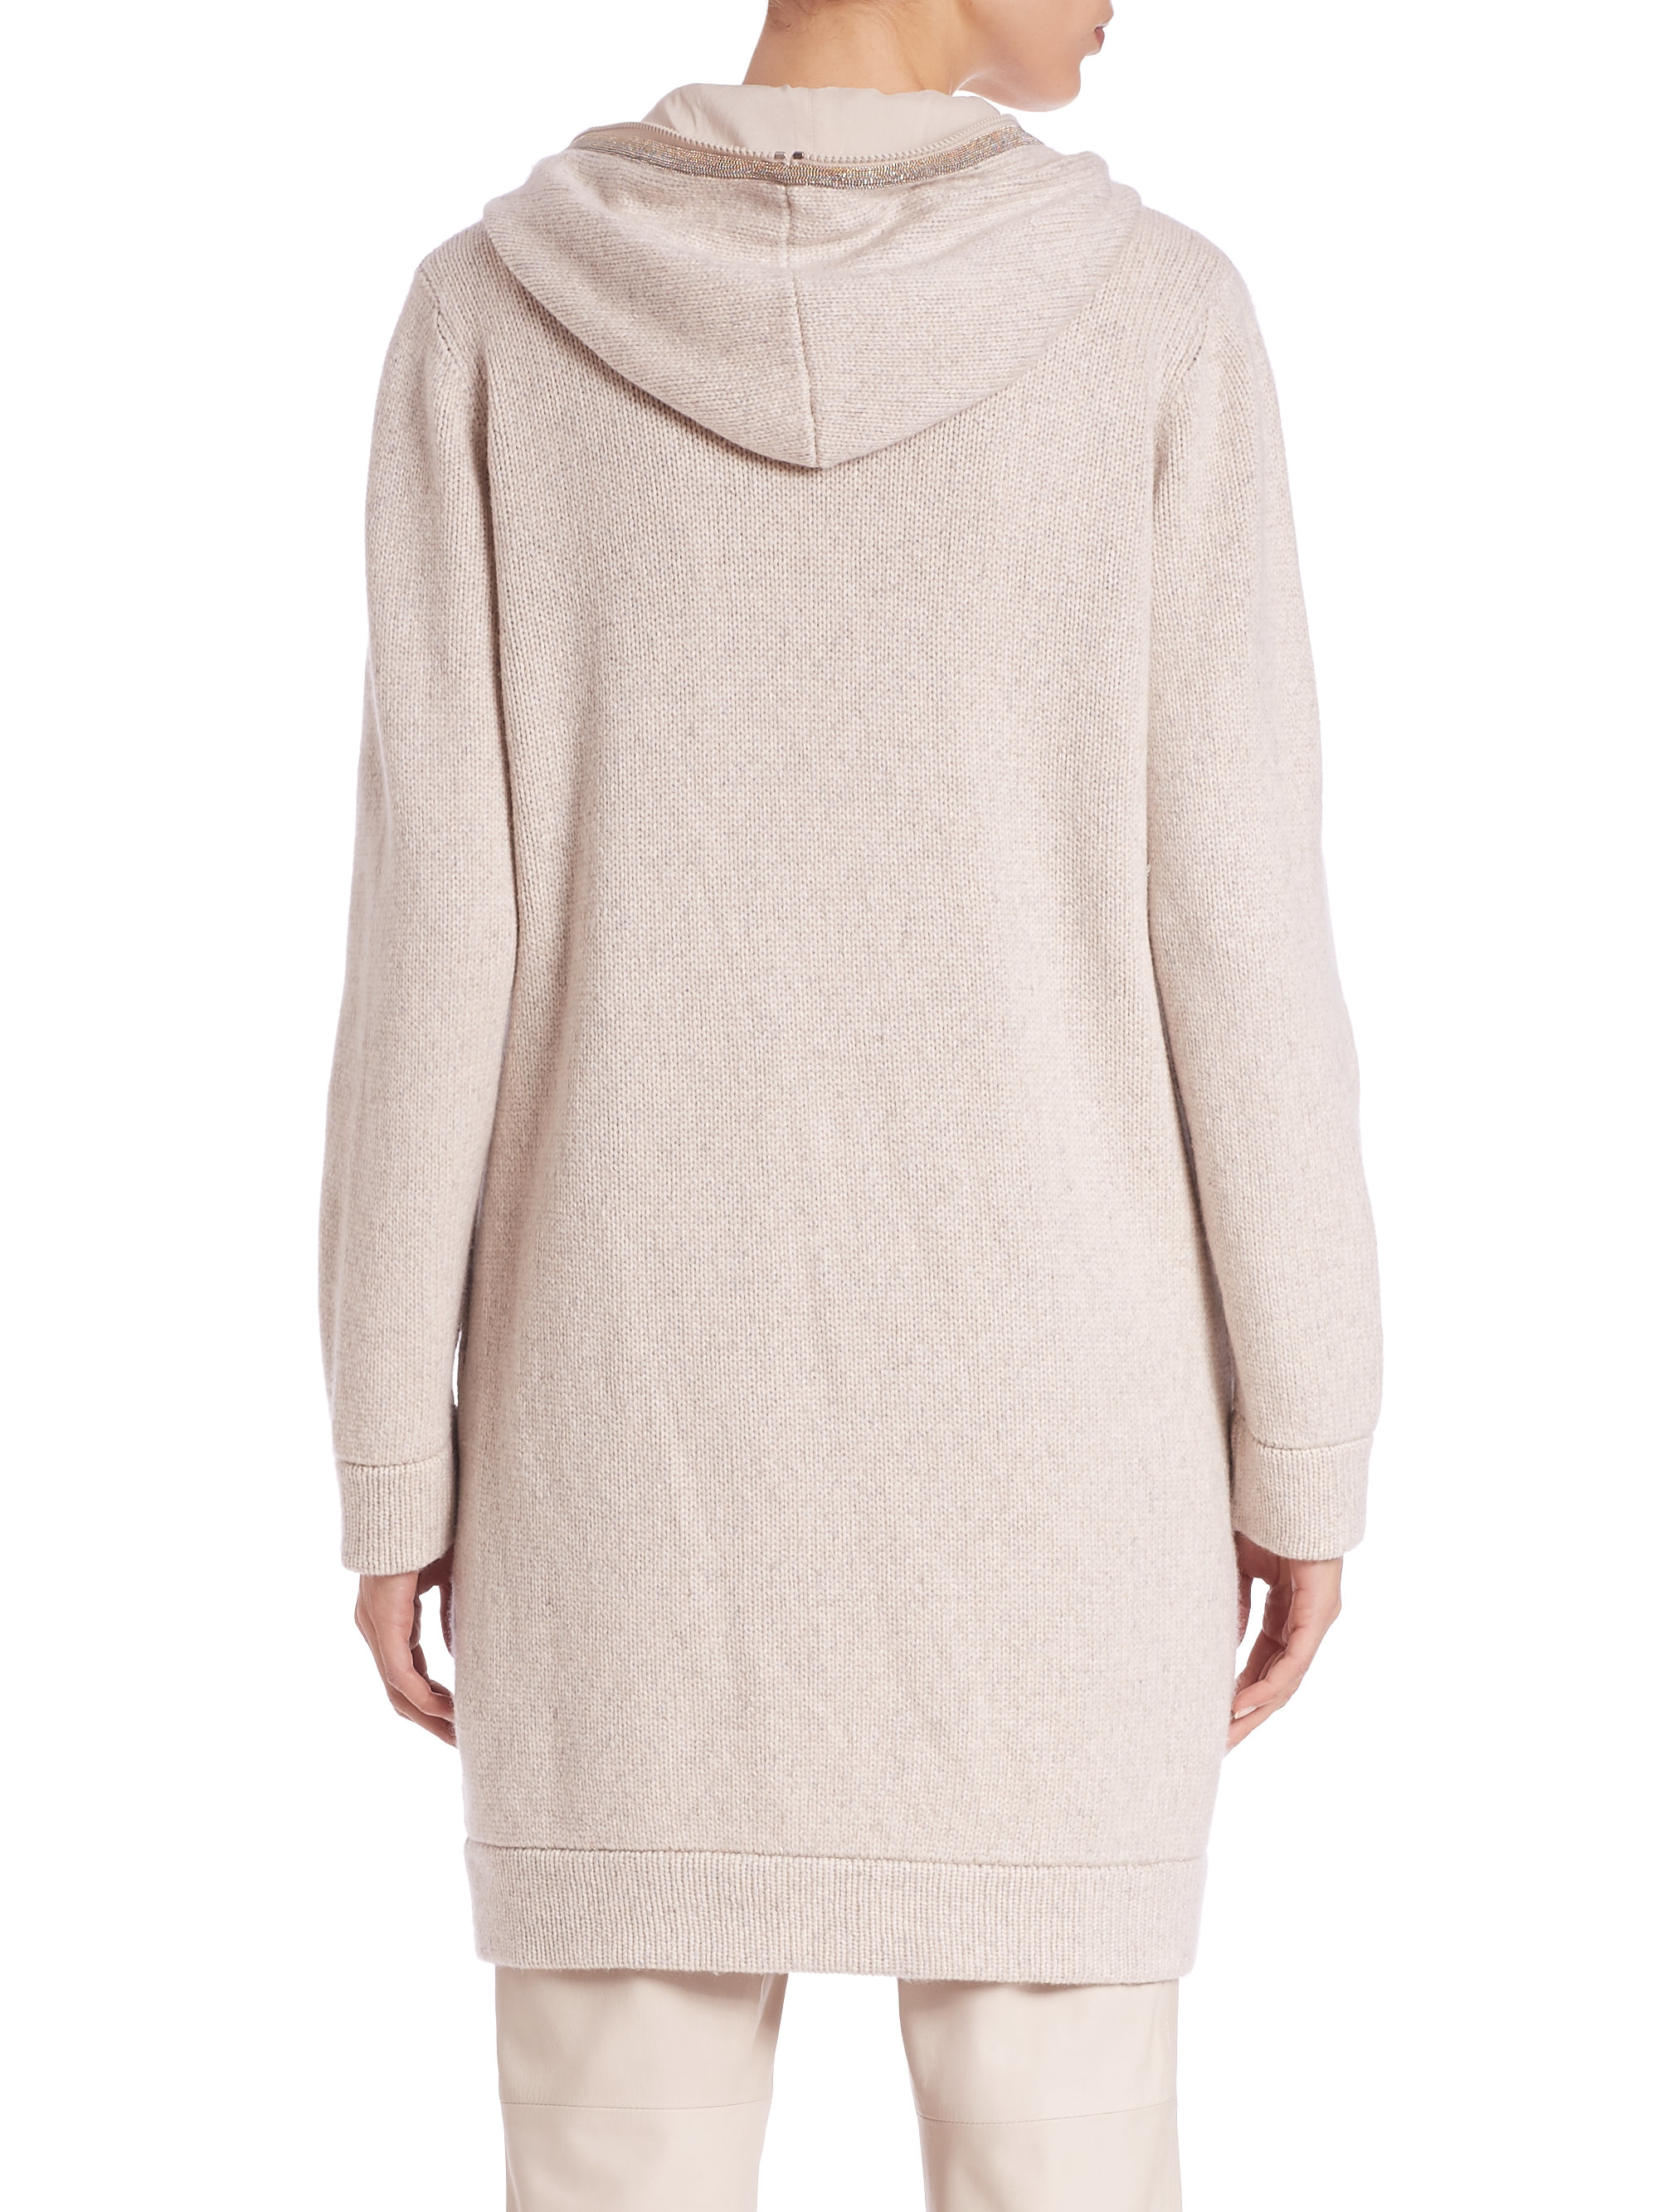 Brunello cucinelli Hooded Cashmere Sweater in Pink | Lyst